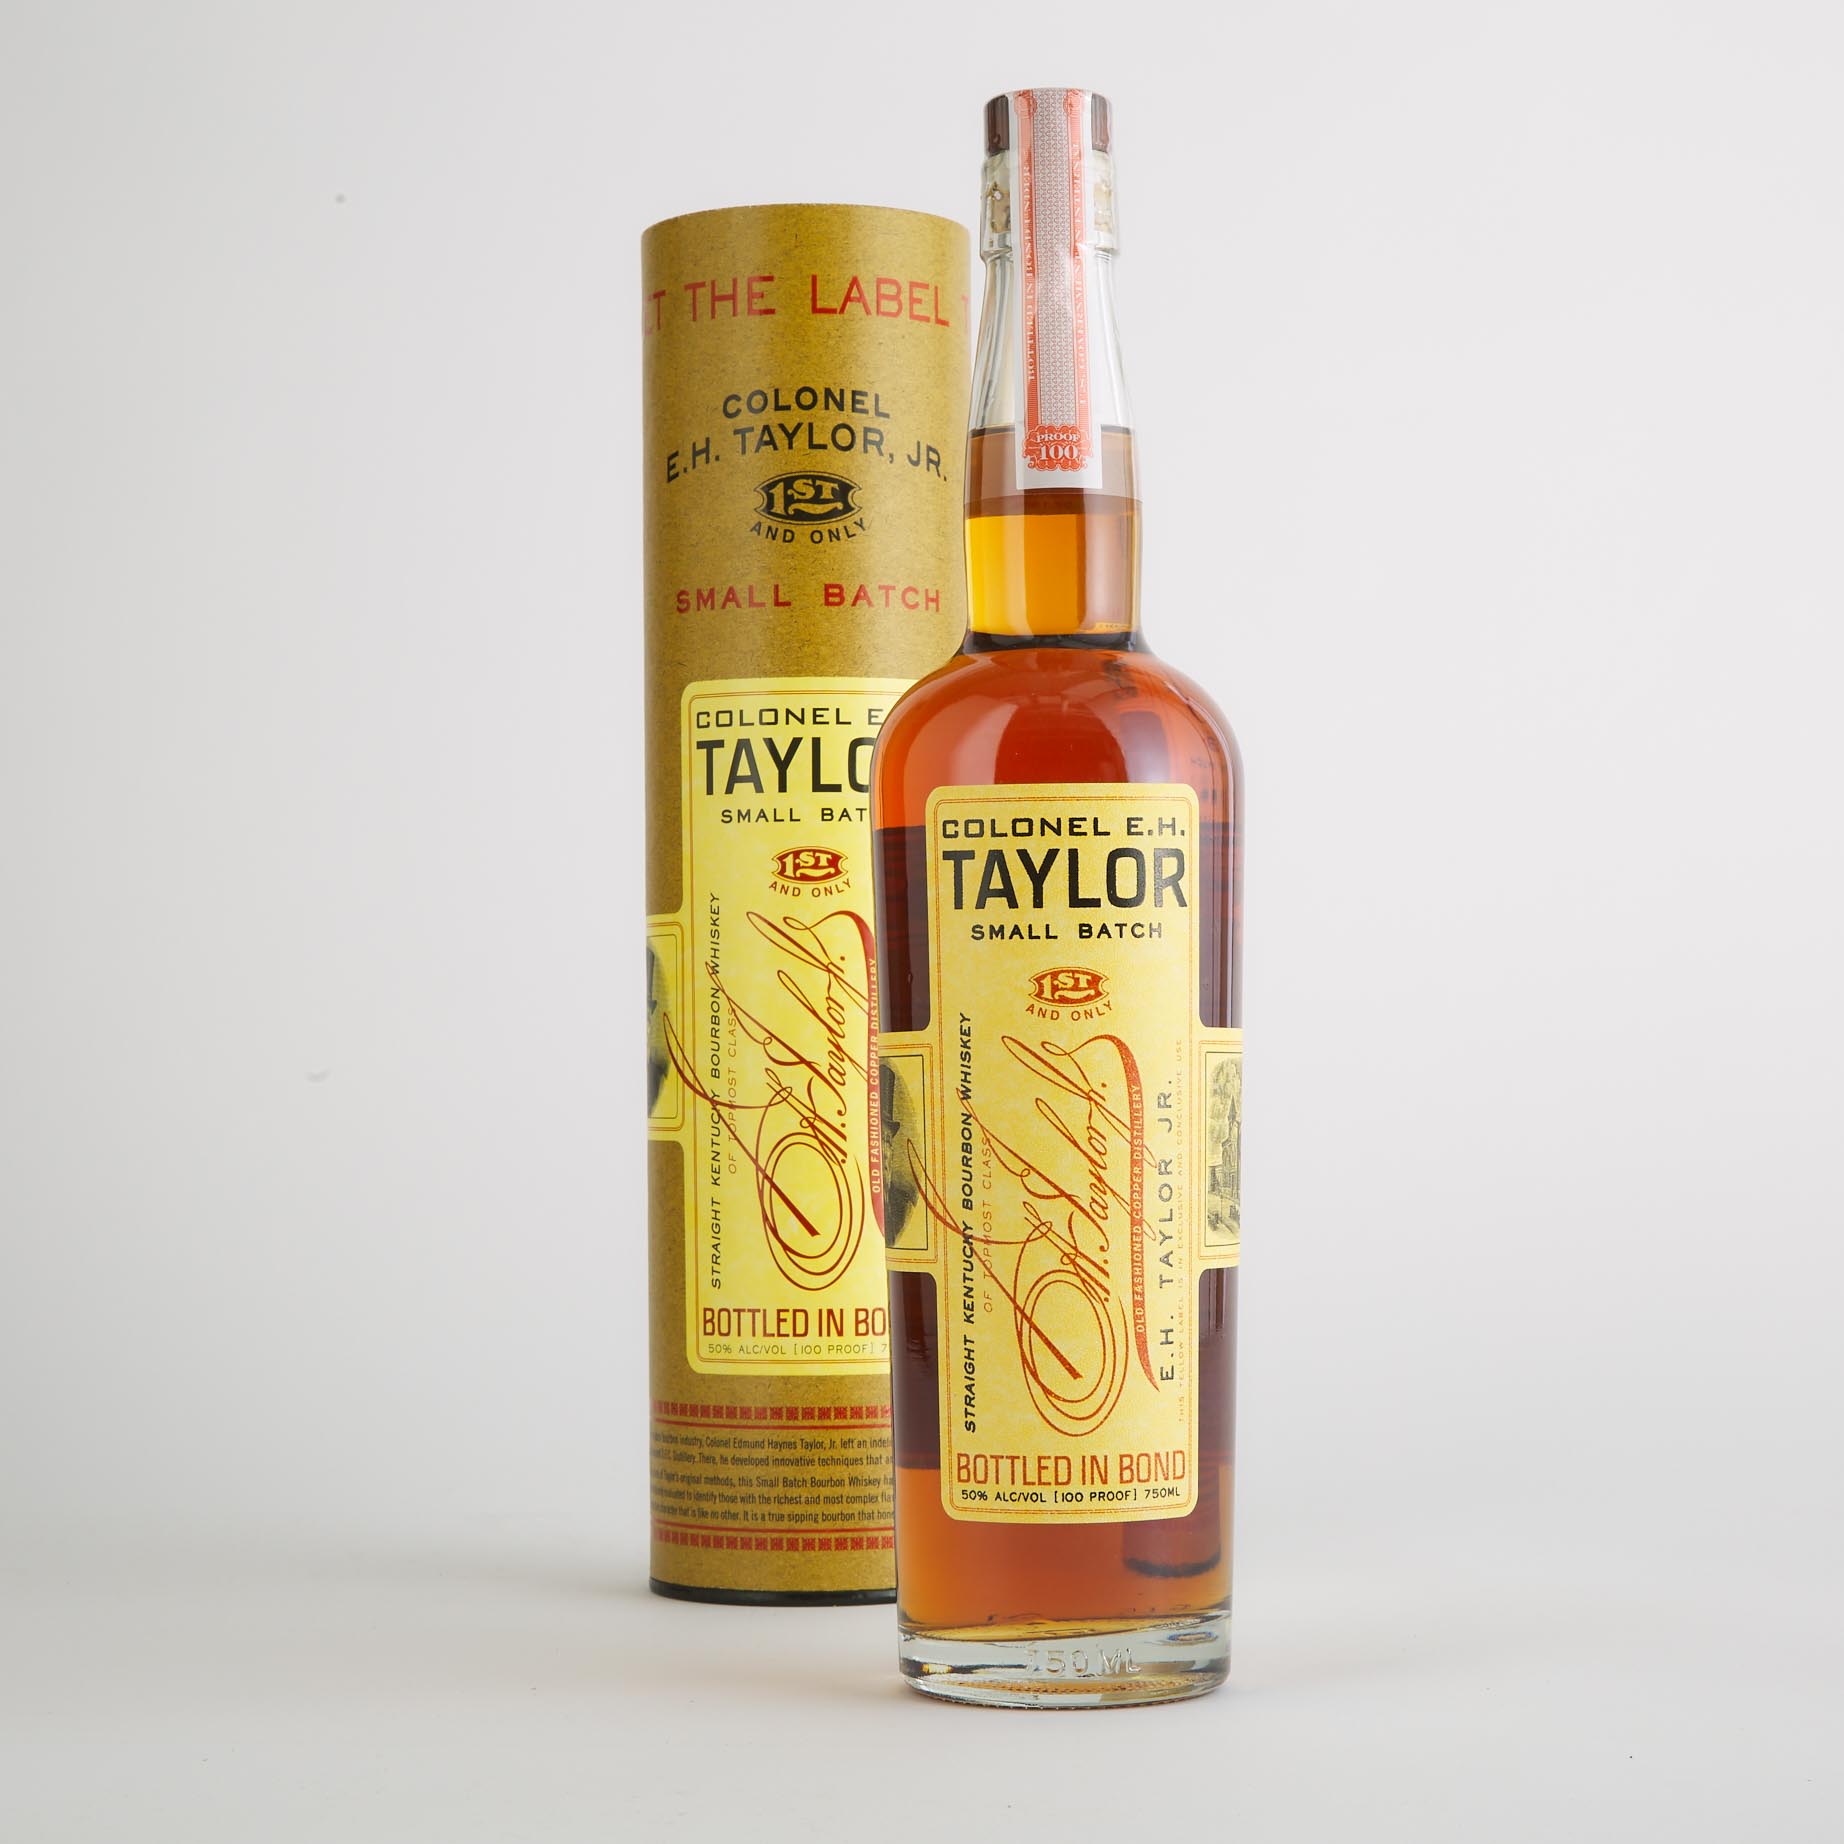 COLONEL E.H. TAYLOR JR. SMALL BATCH STRAIGHT KENTUCKY BOURBON WHISKEY (ONE 750 ML)